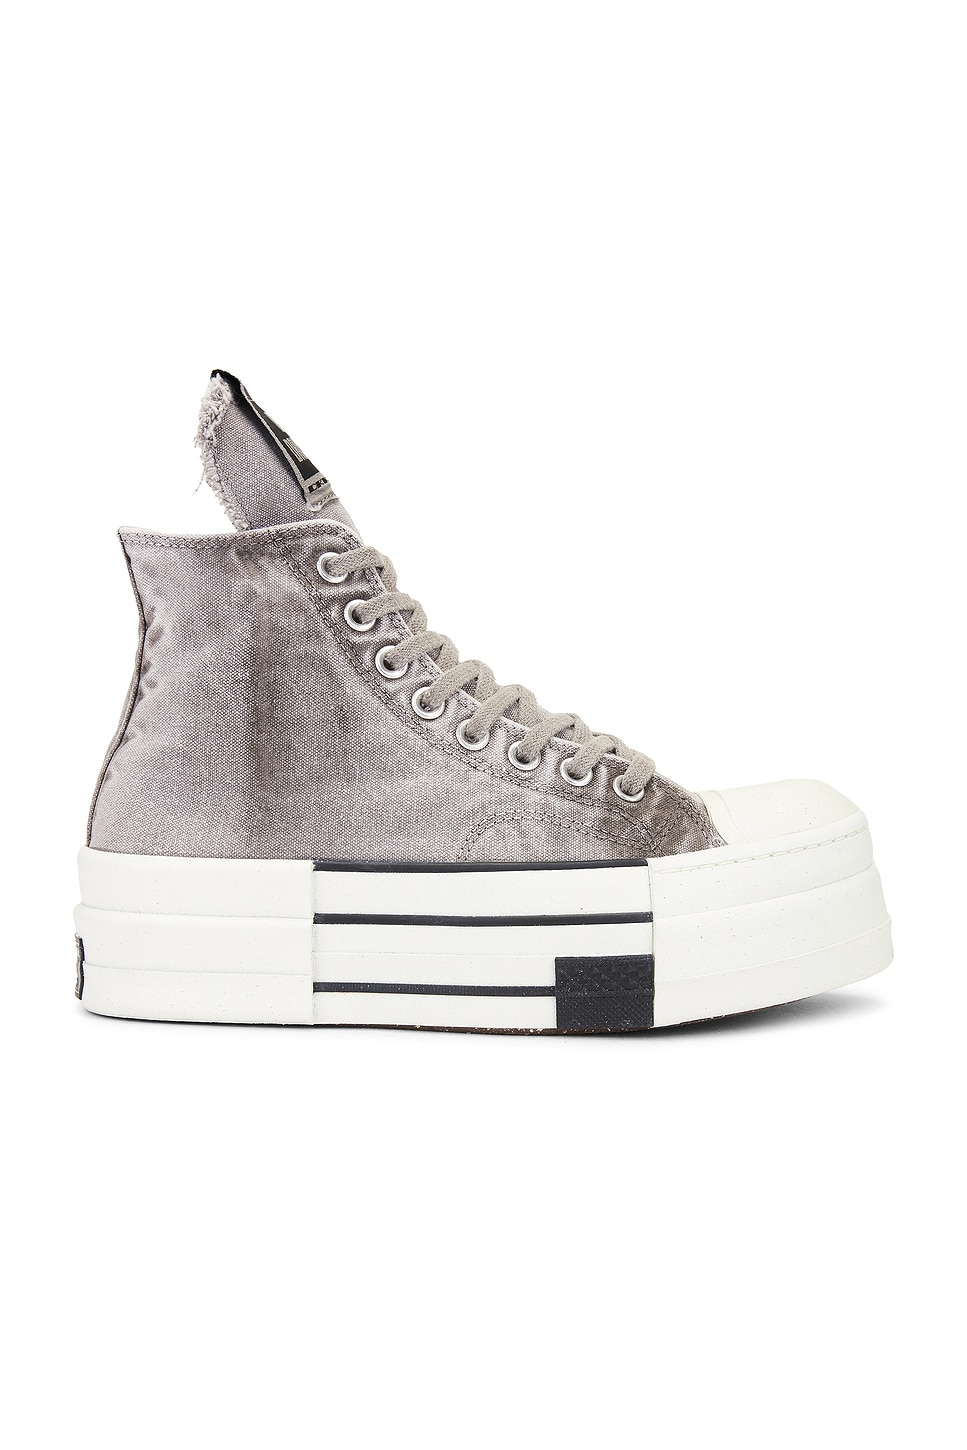 Image 1 of DRKSHDW by Rick Owens x Converse DBL Drkstar Hi Sneaker in Overdyed Concrete